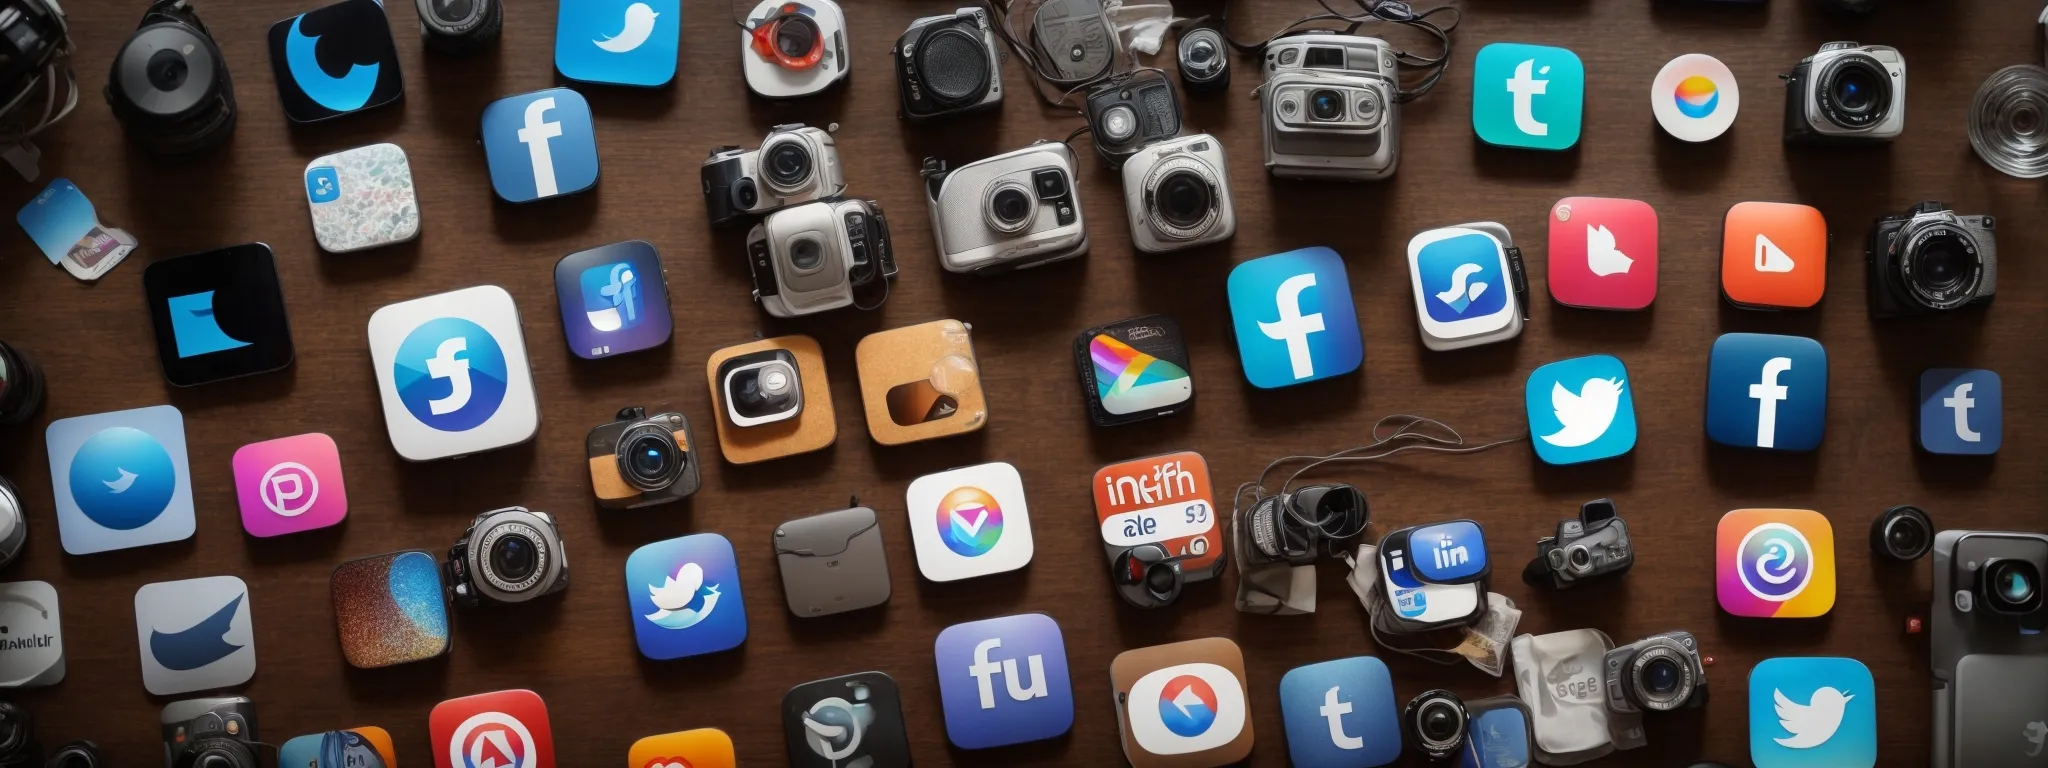 a smartphone showing a diverse array of social media application icons on its screen, resting on a marketer's workspace.